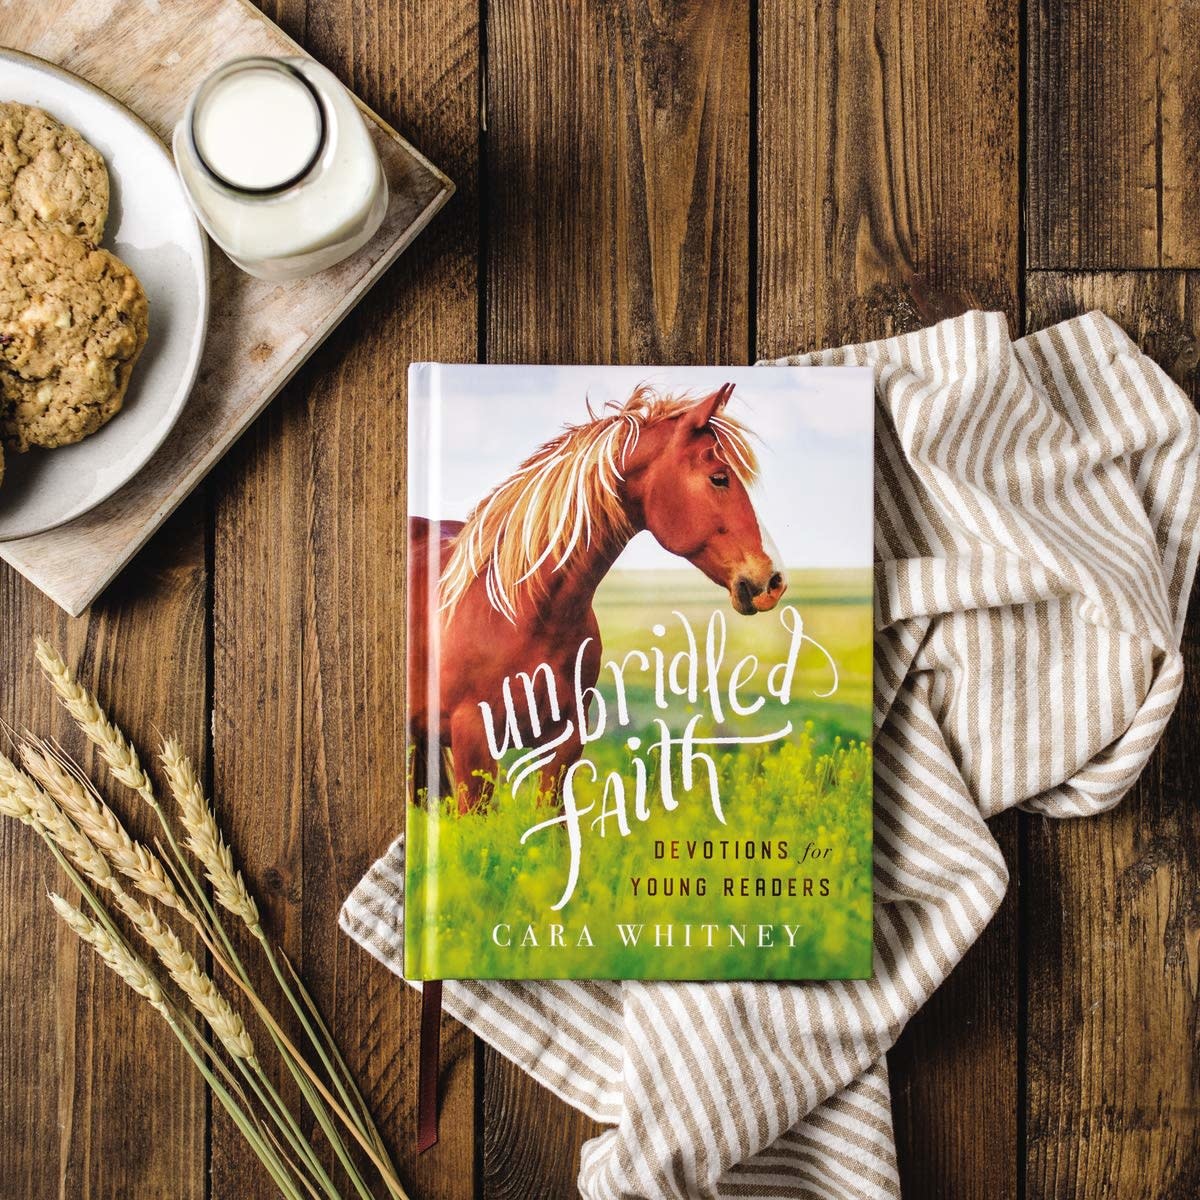 Cara Whitney Unbridled Faith: Devotions For Young Readers